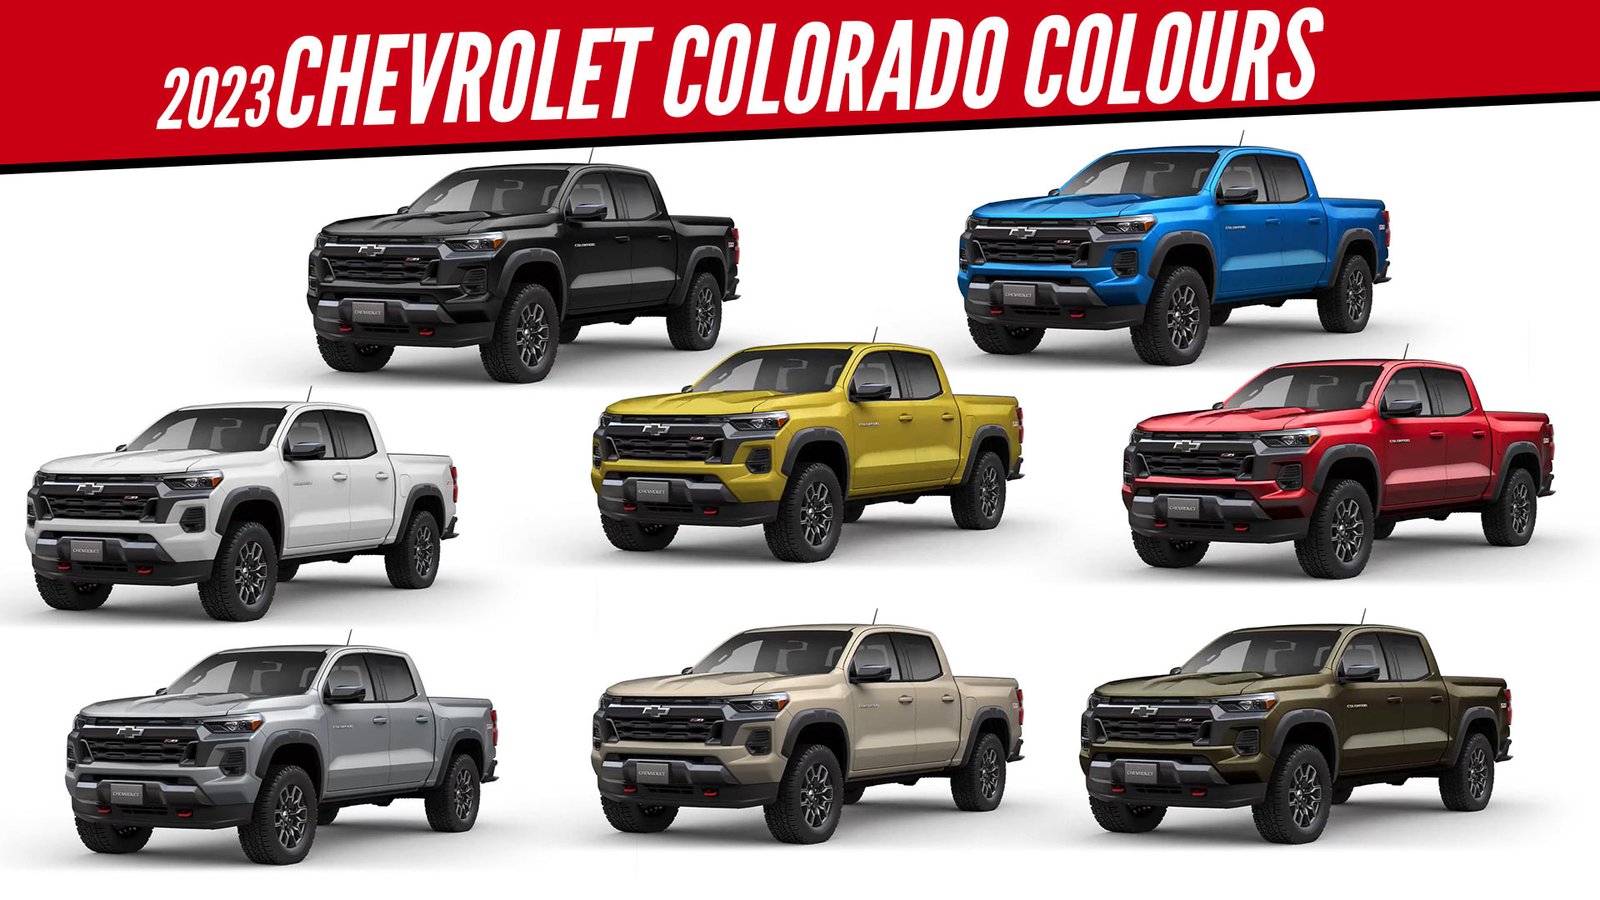 2023 Chevrolet Colorado Pickup Truck All Color Options Images